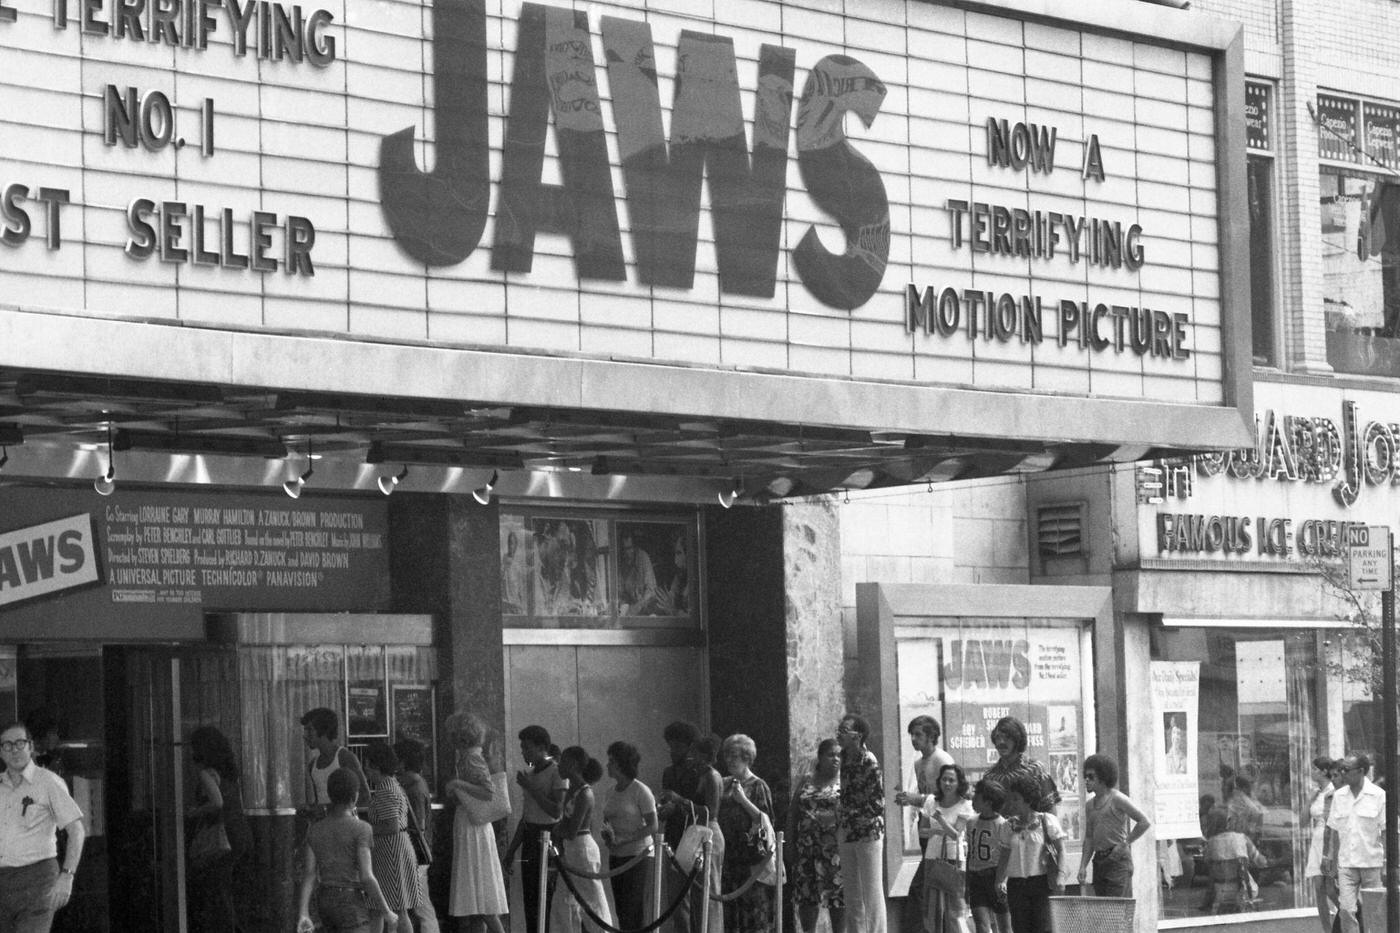 Crowds line up outside movie house to see, 'Jaws'